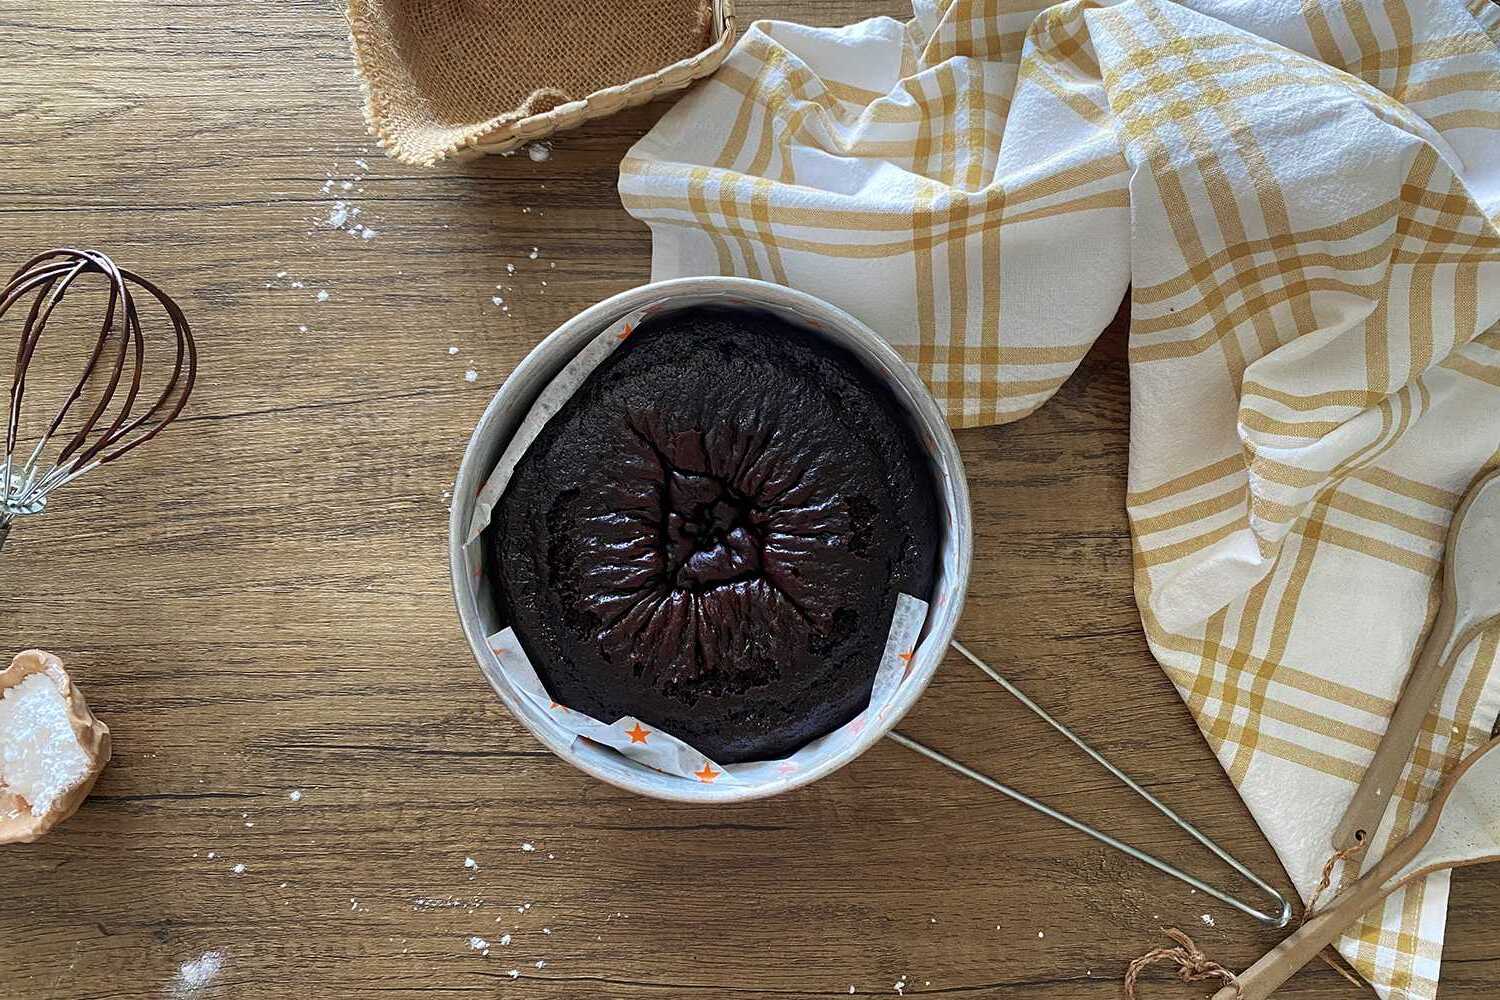 How to Make a Box Cake in the Pressure Cooker